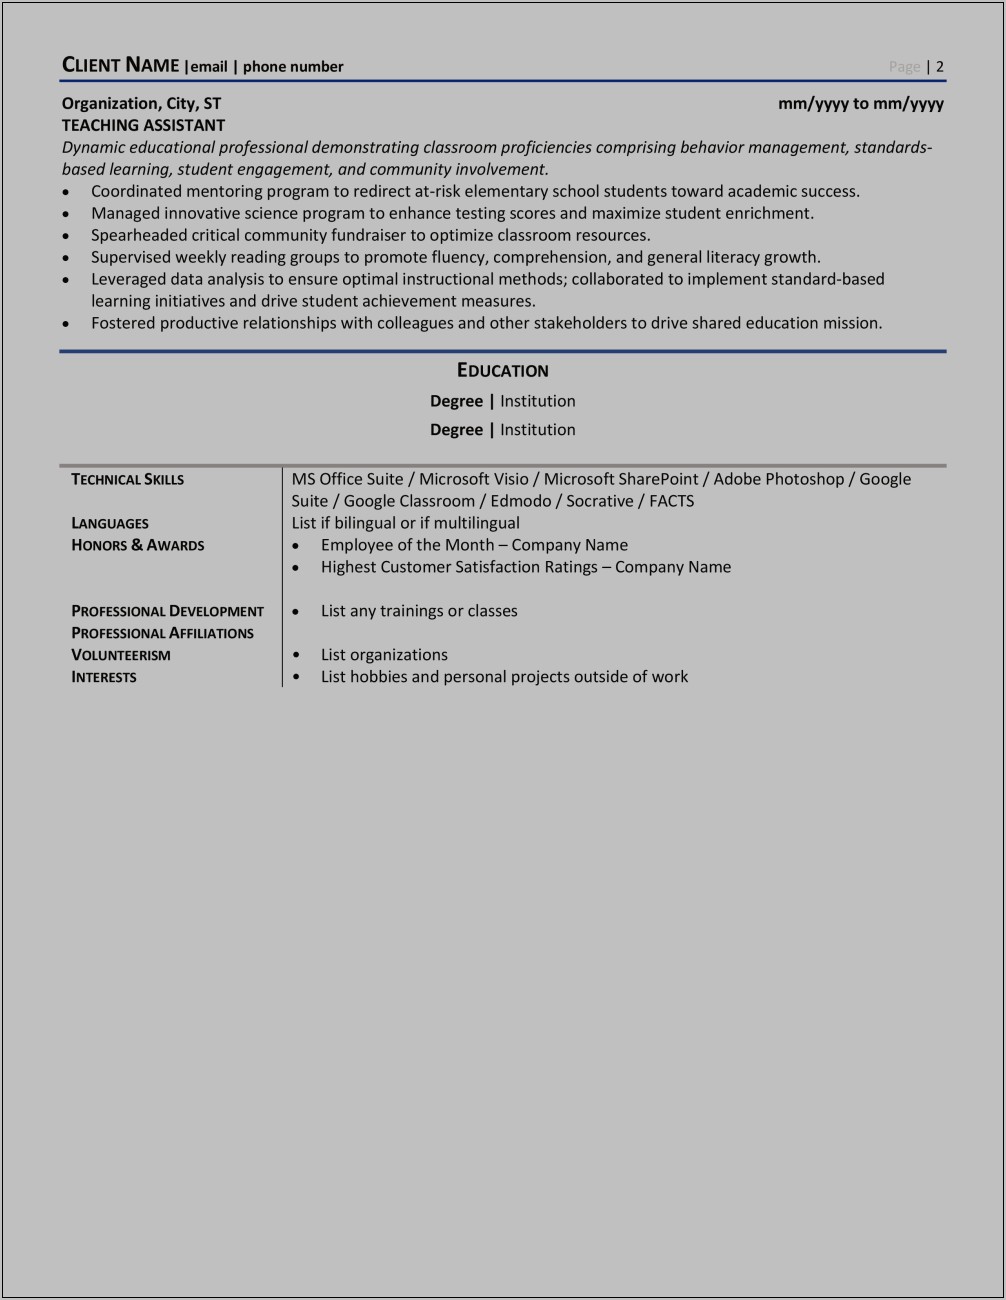 Resume Honors And Awards Examples